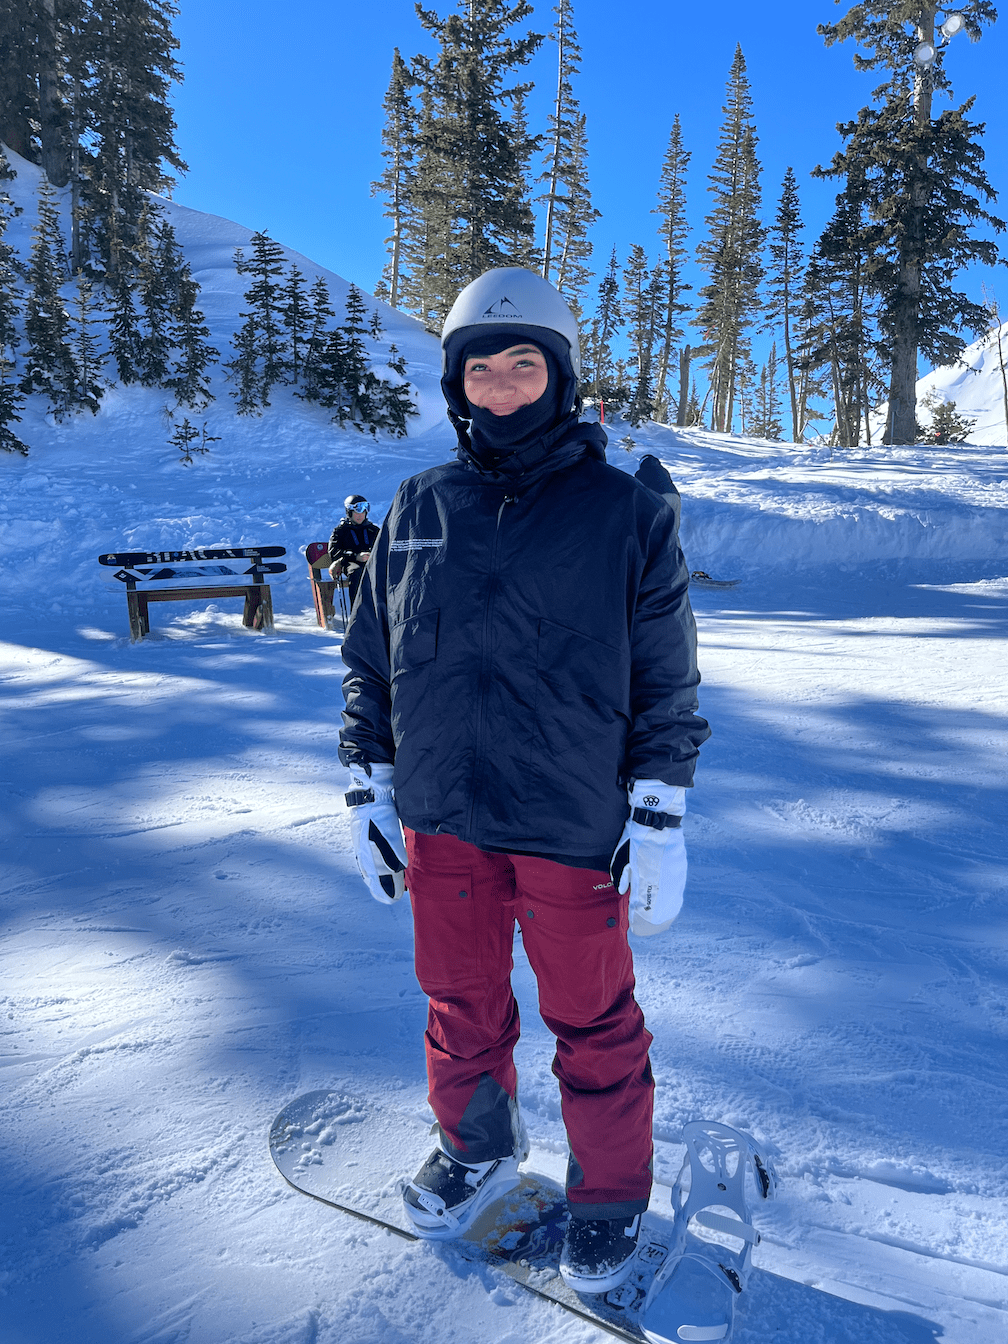 Girl in black jacket and red snow pants standing in snow on snowboard